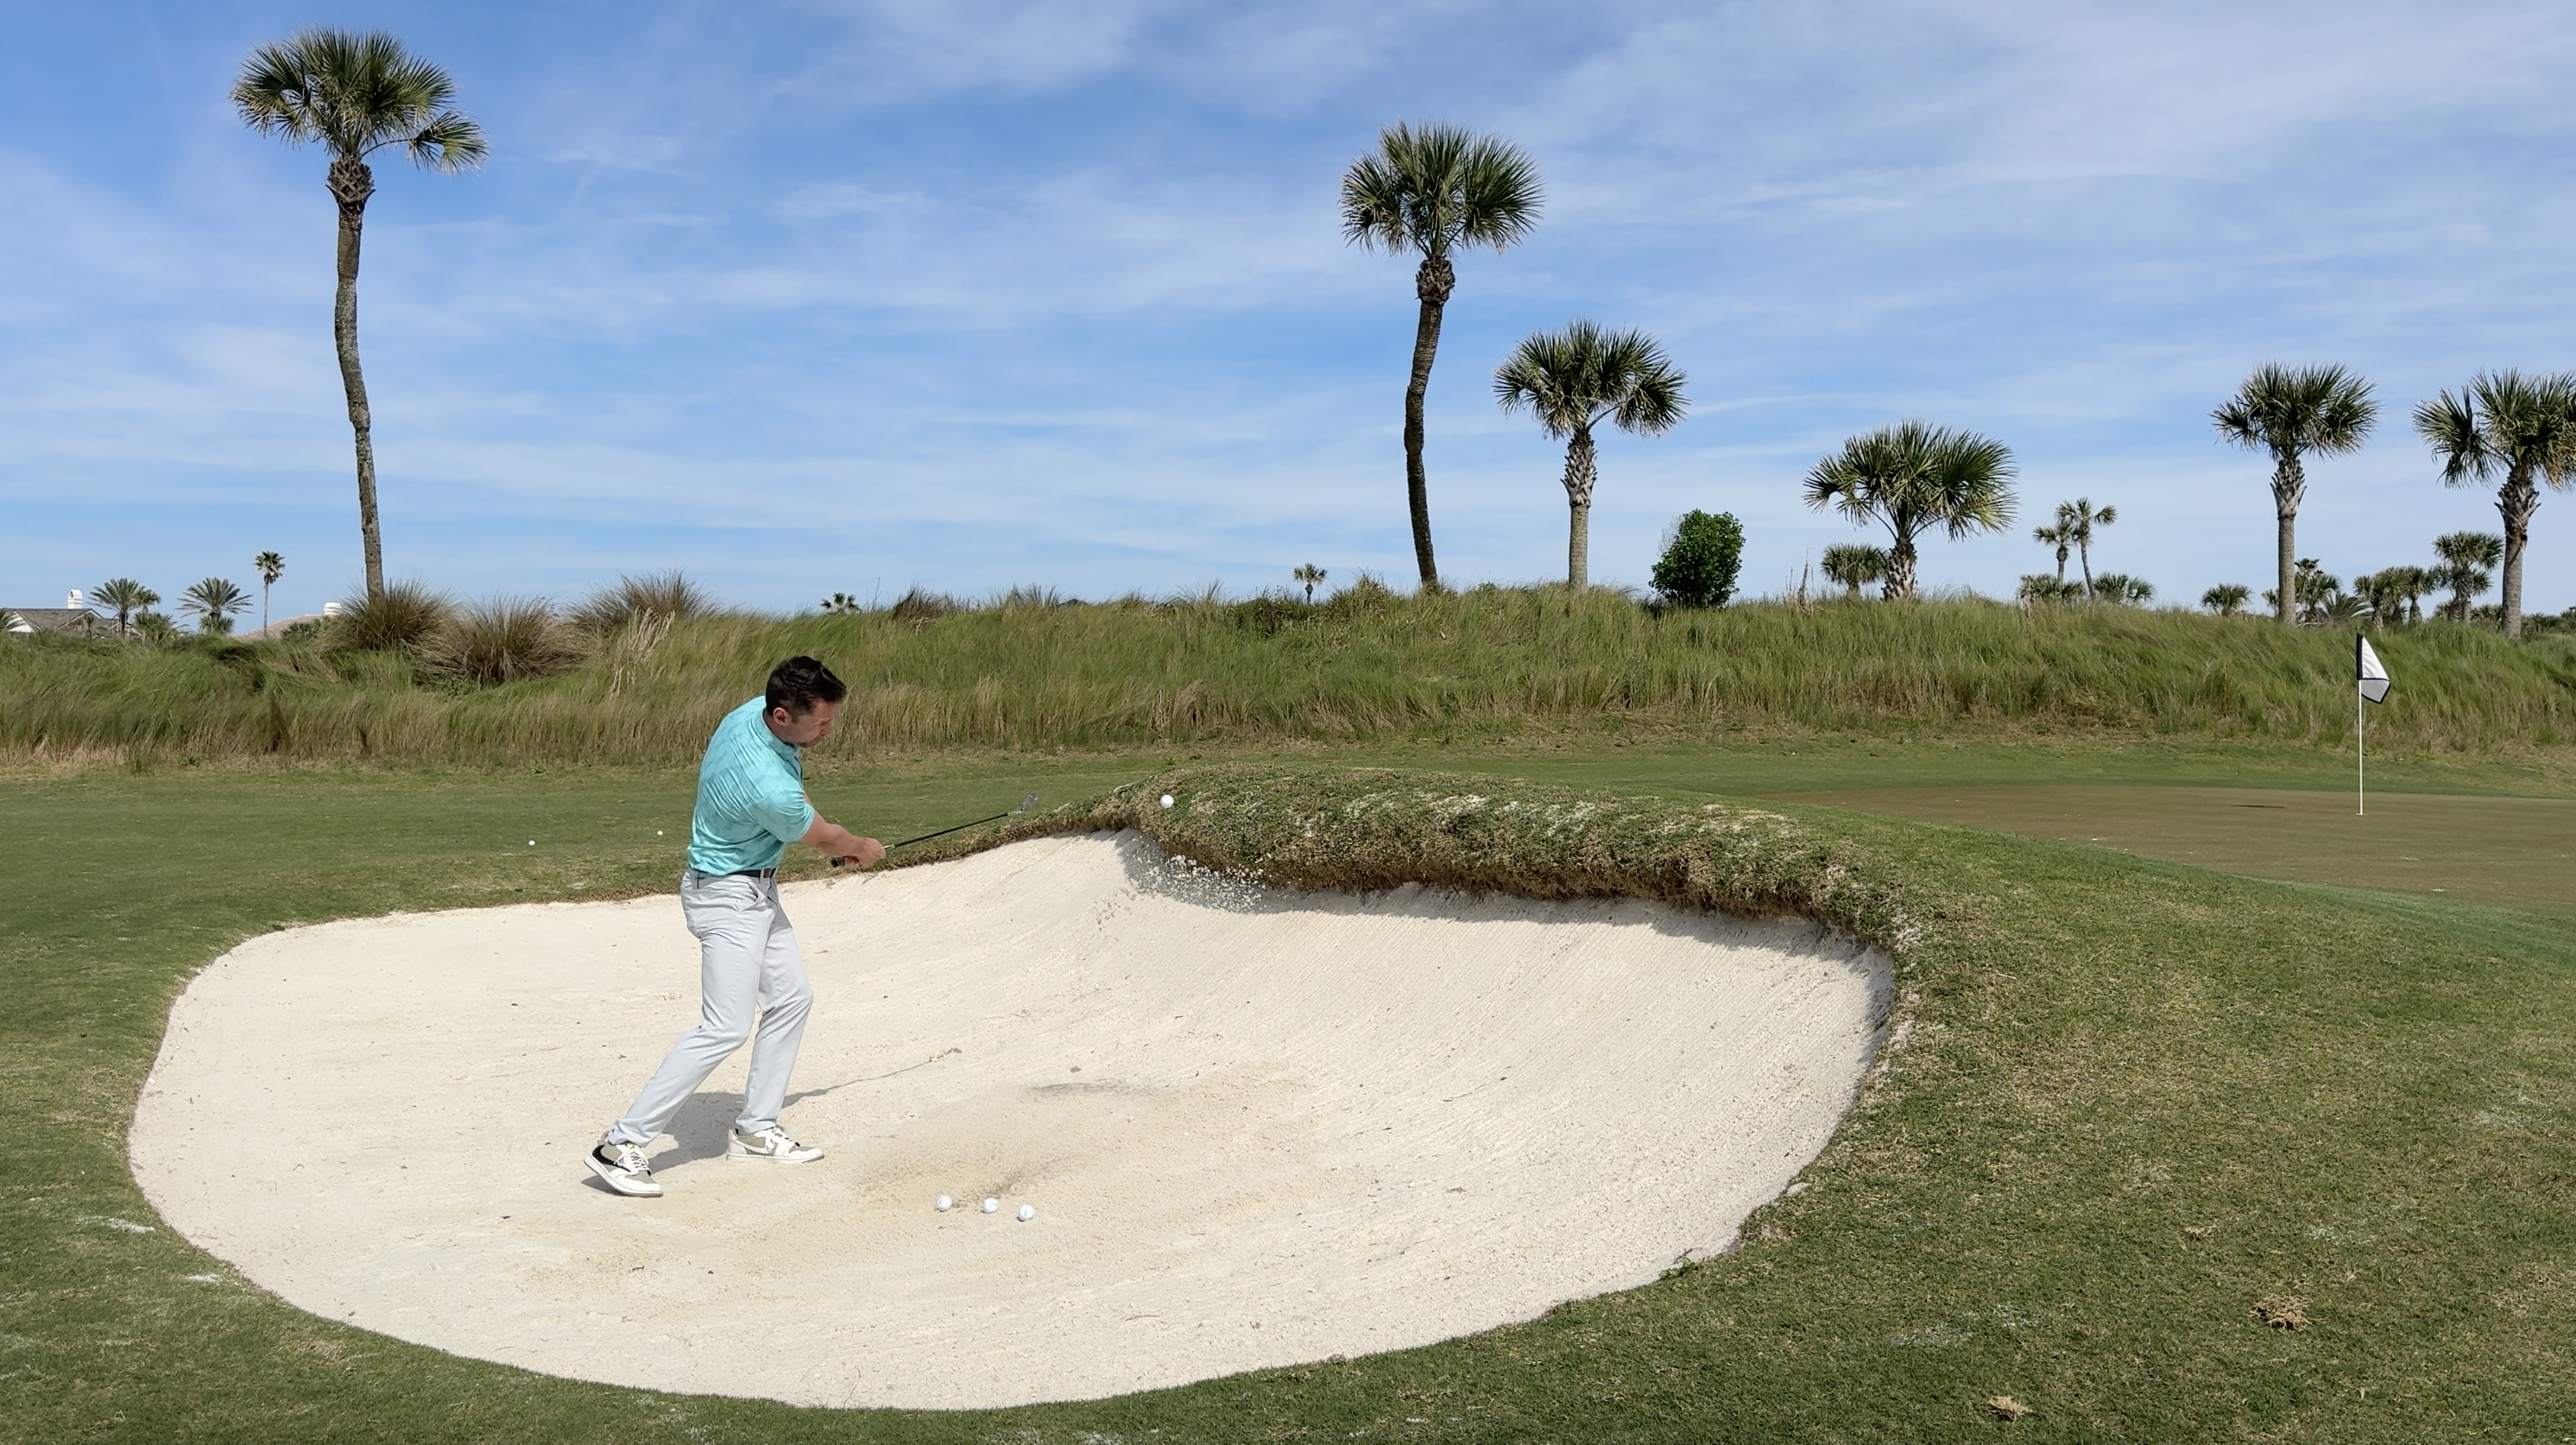 The EASIEST Bunker Shot Technique You Have EVER Seen!